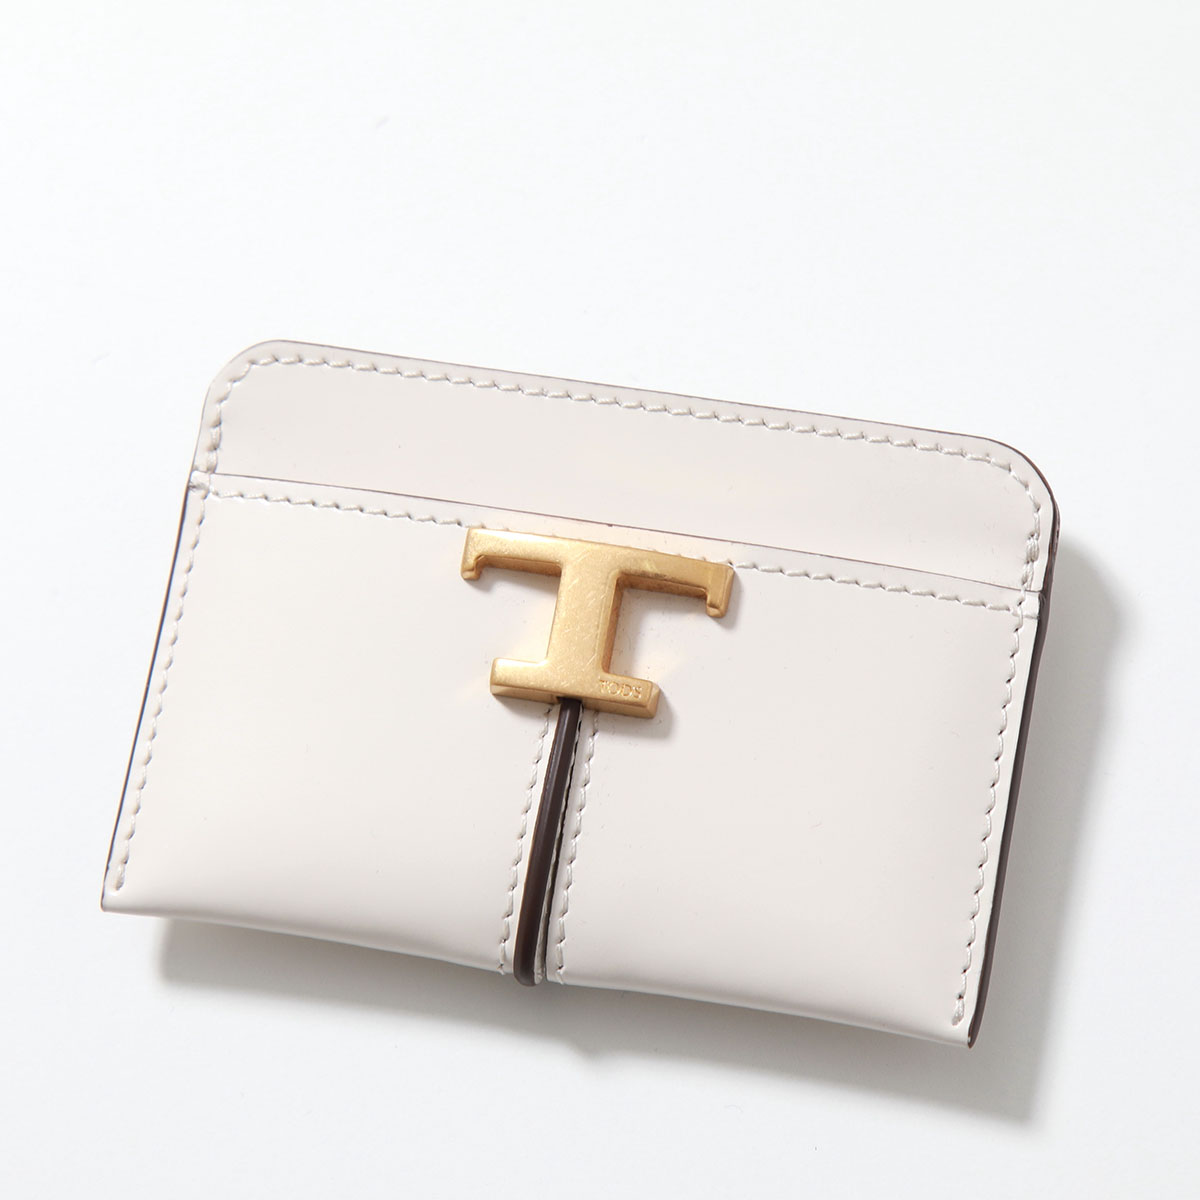 TODS カードケース T TIMELESS Tタイムレス XAWTSKF1100KET メンズ レ...